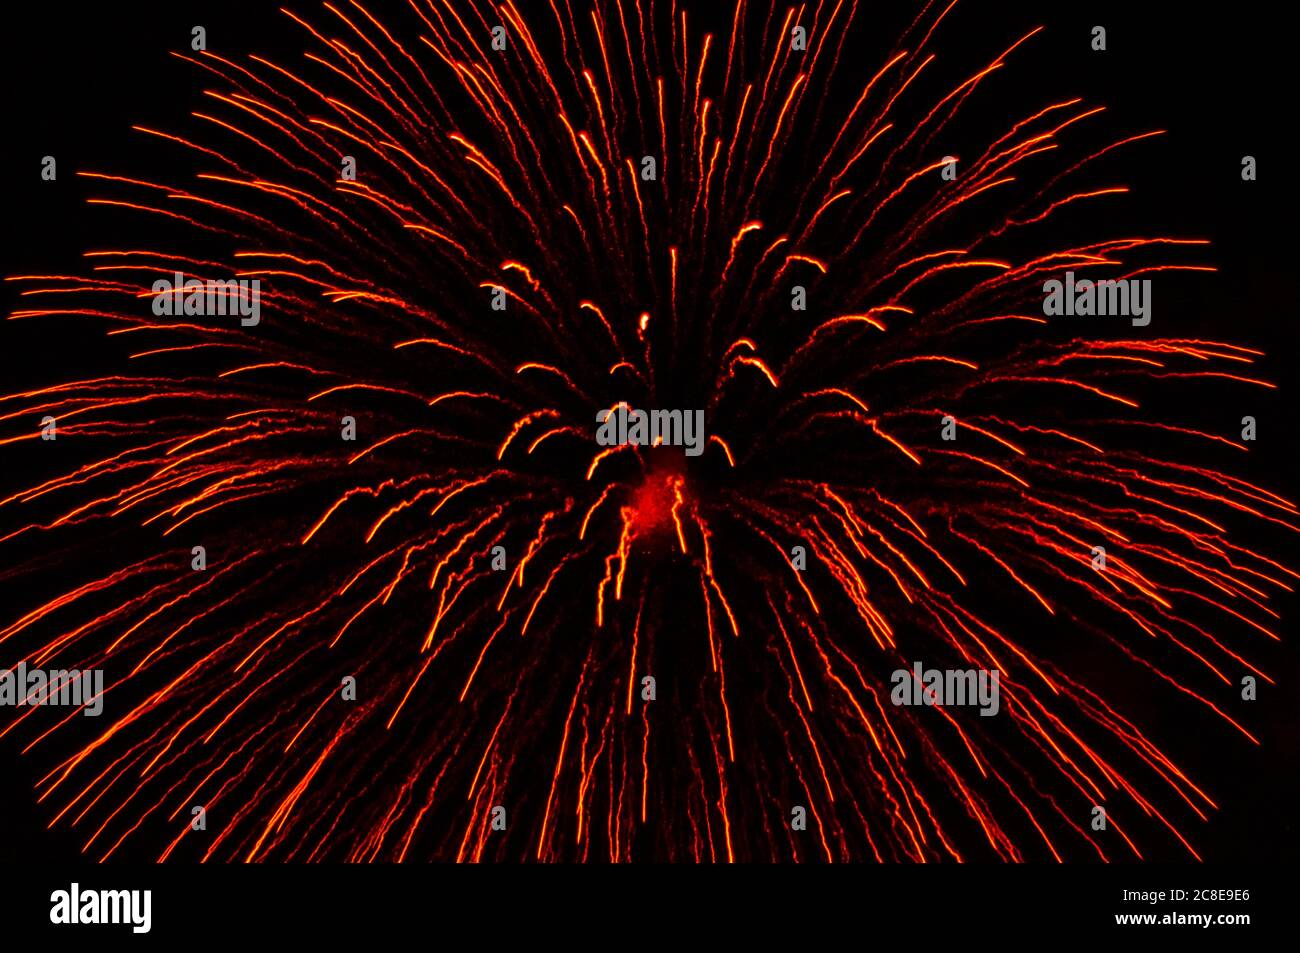 Red fireworks exploding against night sky Stock Photo